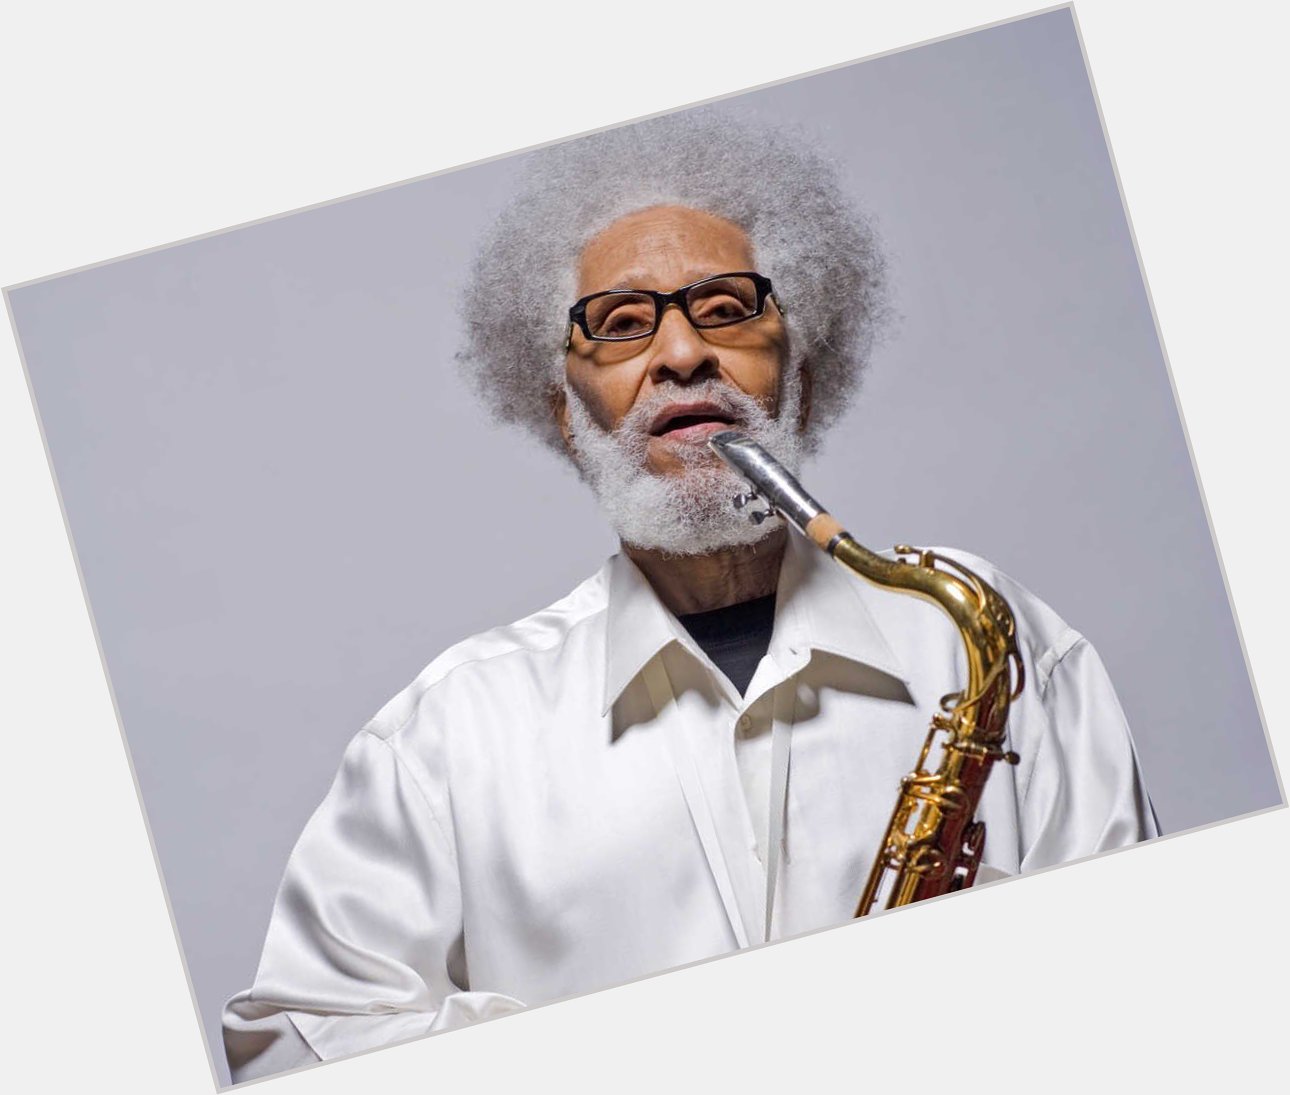 Happy birthday to American jazz saxophonist, composer, and bandleader Sonny Rollins, born September 7, 1930. 